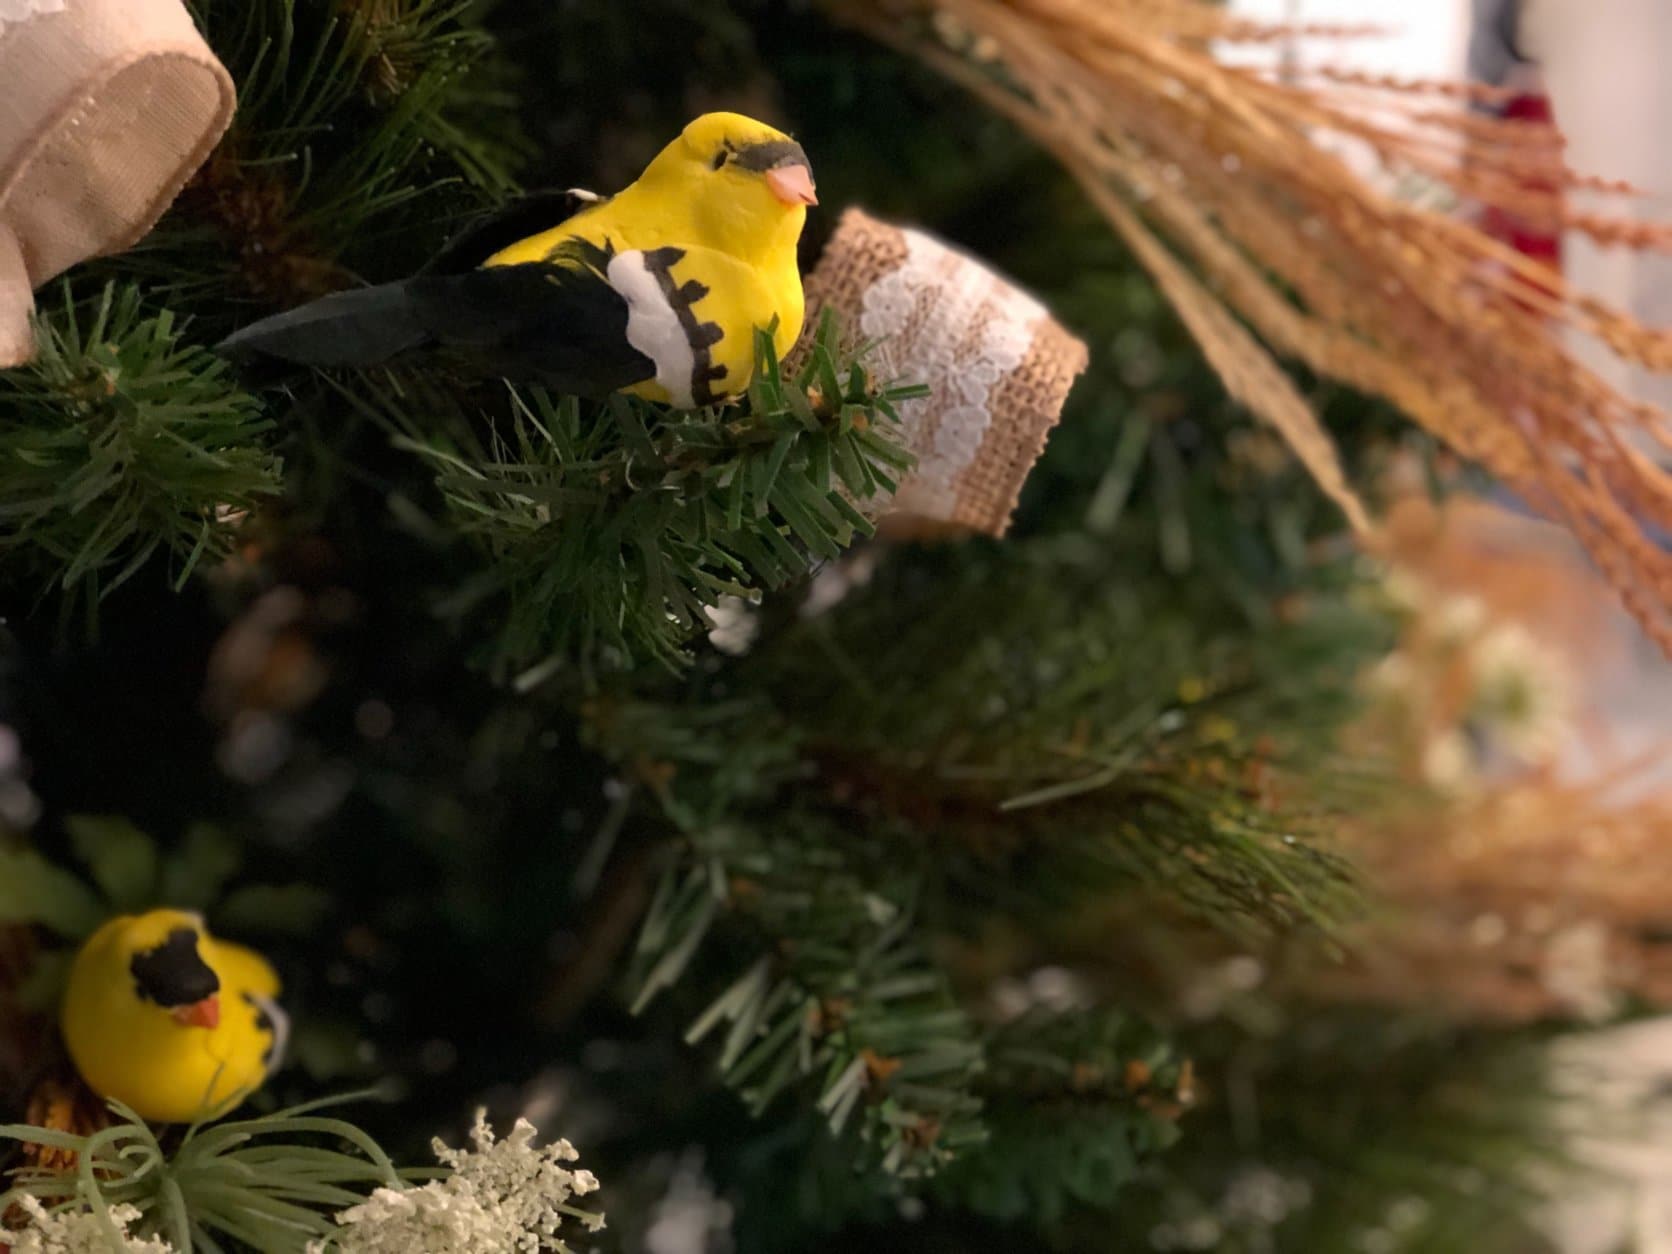 Why are goldfinches in this Christmas tree? Whole the Baltimore Oriole may be Maryland’s state bird, the bird of Howard County is the goldfinch. This tree is on view at Maryland’s State House in Annapolis, as part of a display of trees decorated by garden clubs across the state. (WTOP/Kate Ryan)